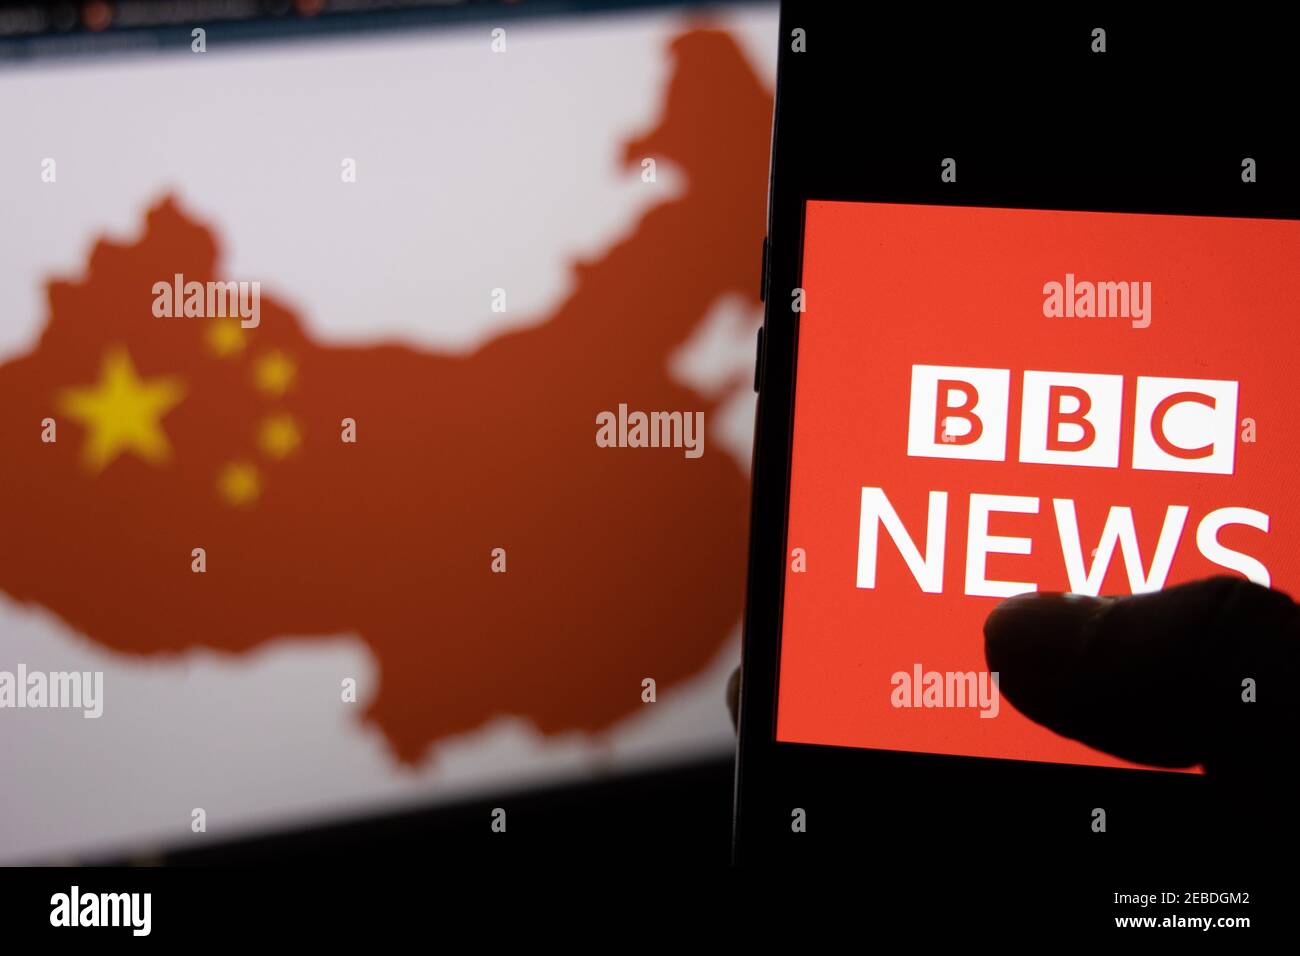 Kathmandu, Nepal - February 12 2021: BBC News Logo against the Map of China in red on a computer screen in the background. Stock Photo